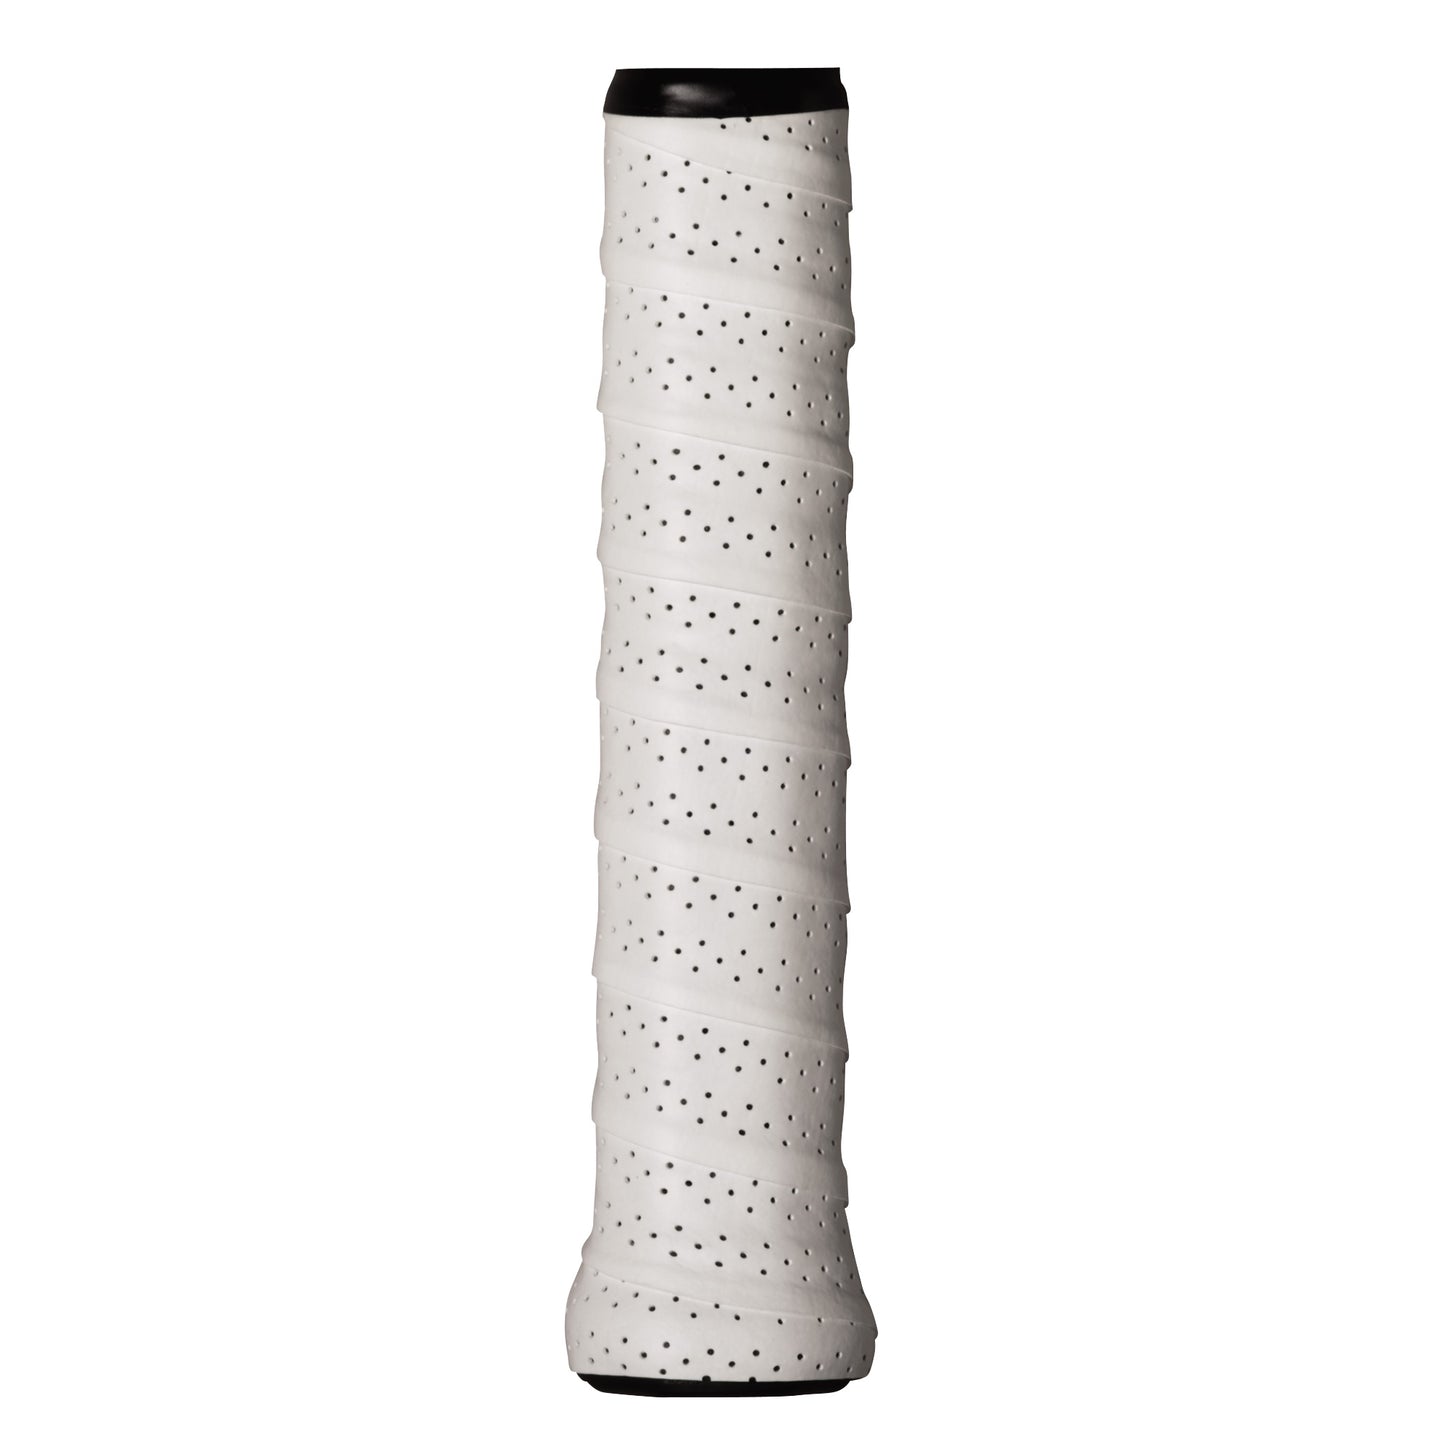 Wilson Pro Perforated White 12-pack overgrip